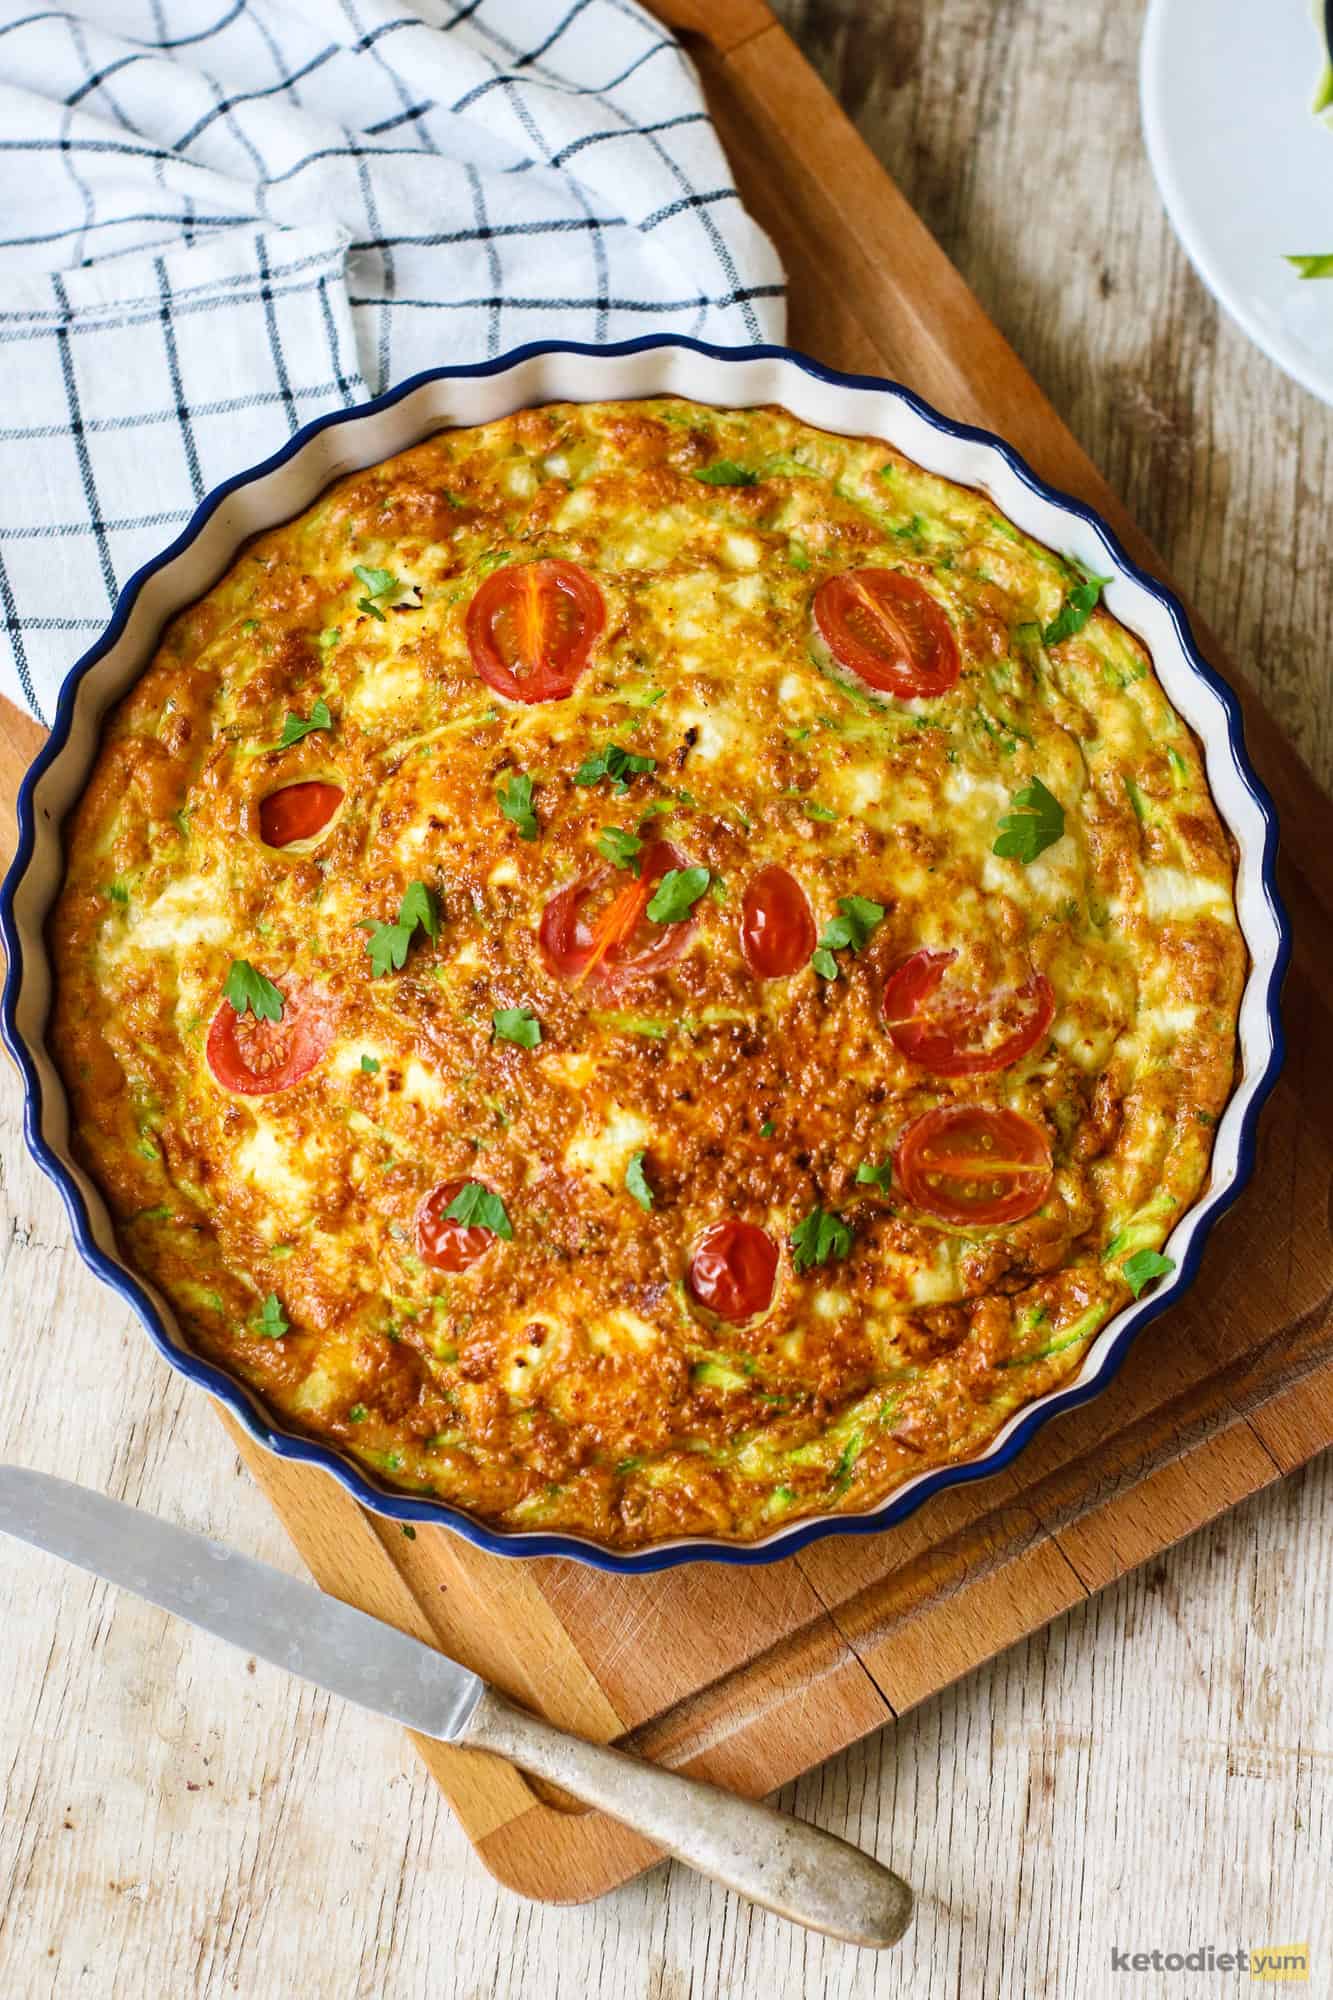 A keto frittata made with zucchini, goat cheese and cherry tomatoes in a baking dish